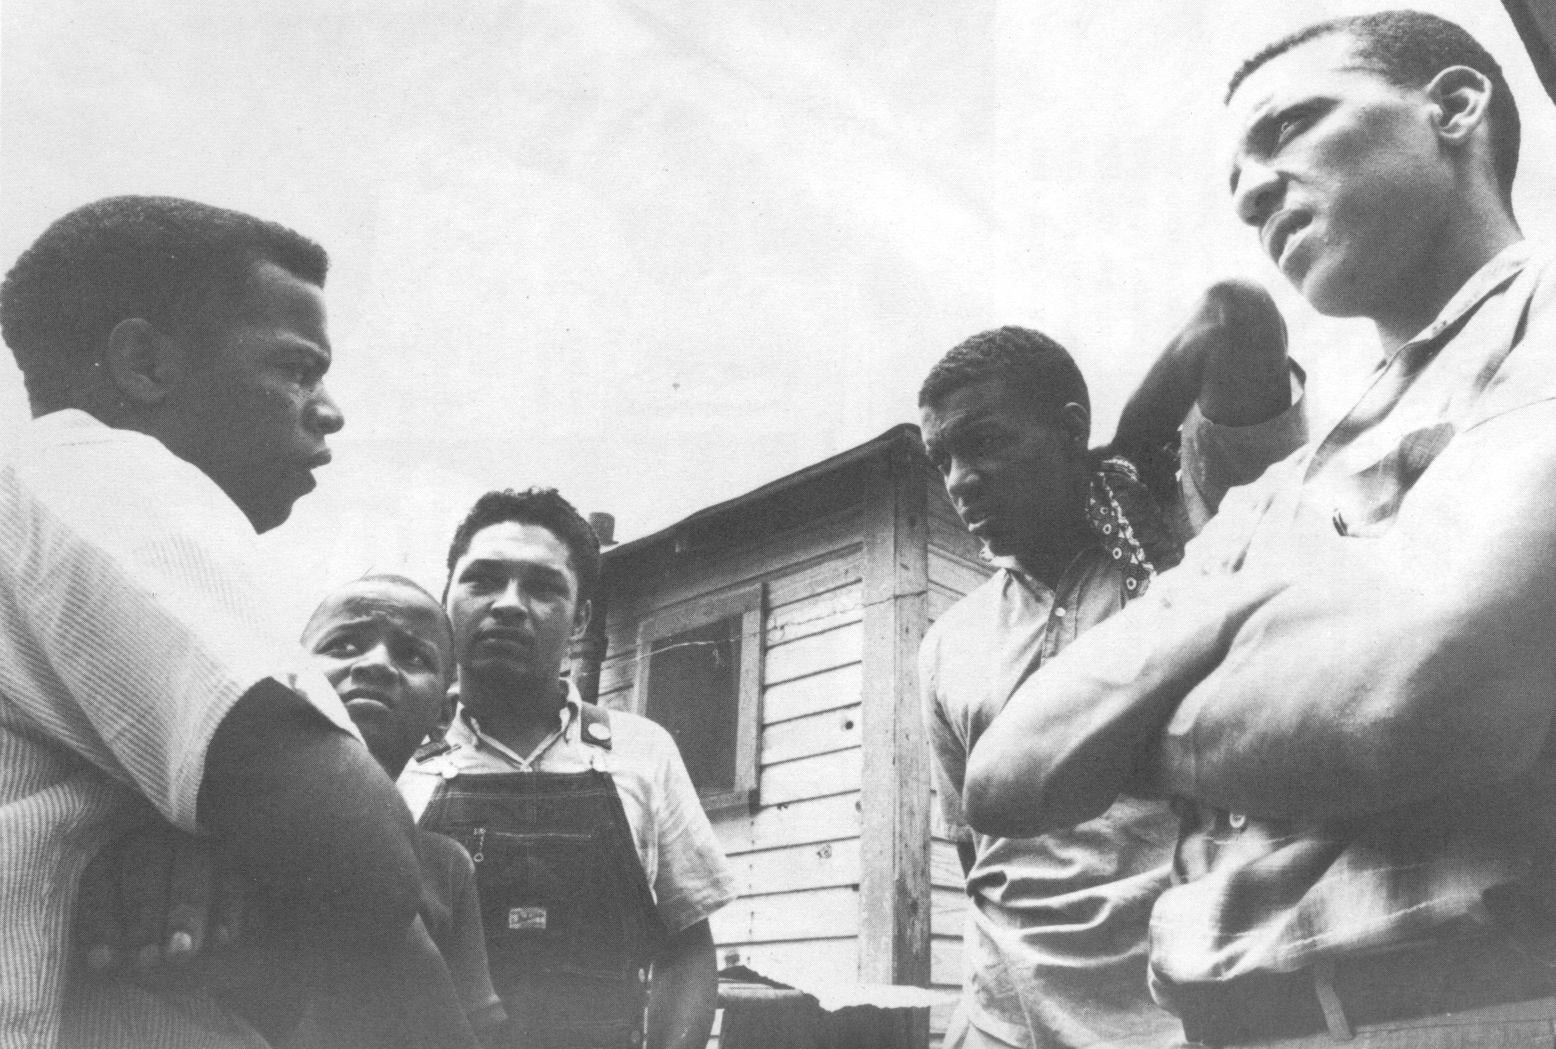 (Left to Right) John Lewis, unidentified boy, Mateo Suarez, Jerome Smith, and Dave Dennis, undated, crmvet.org